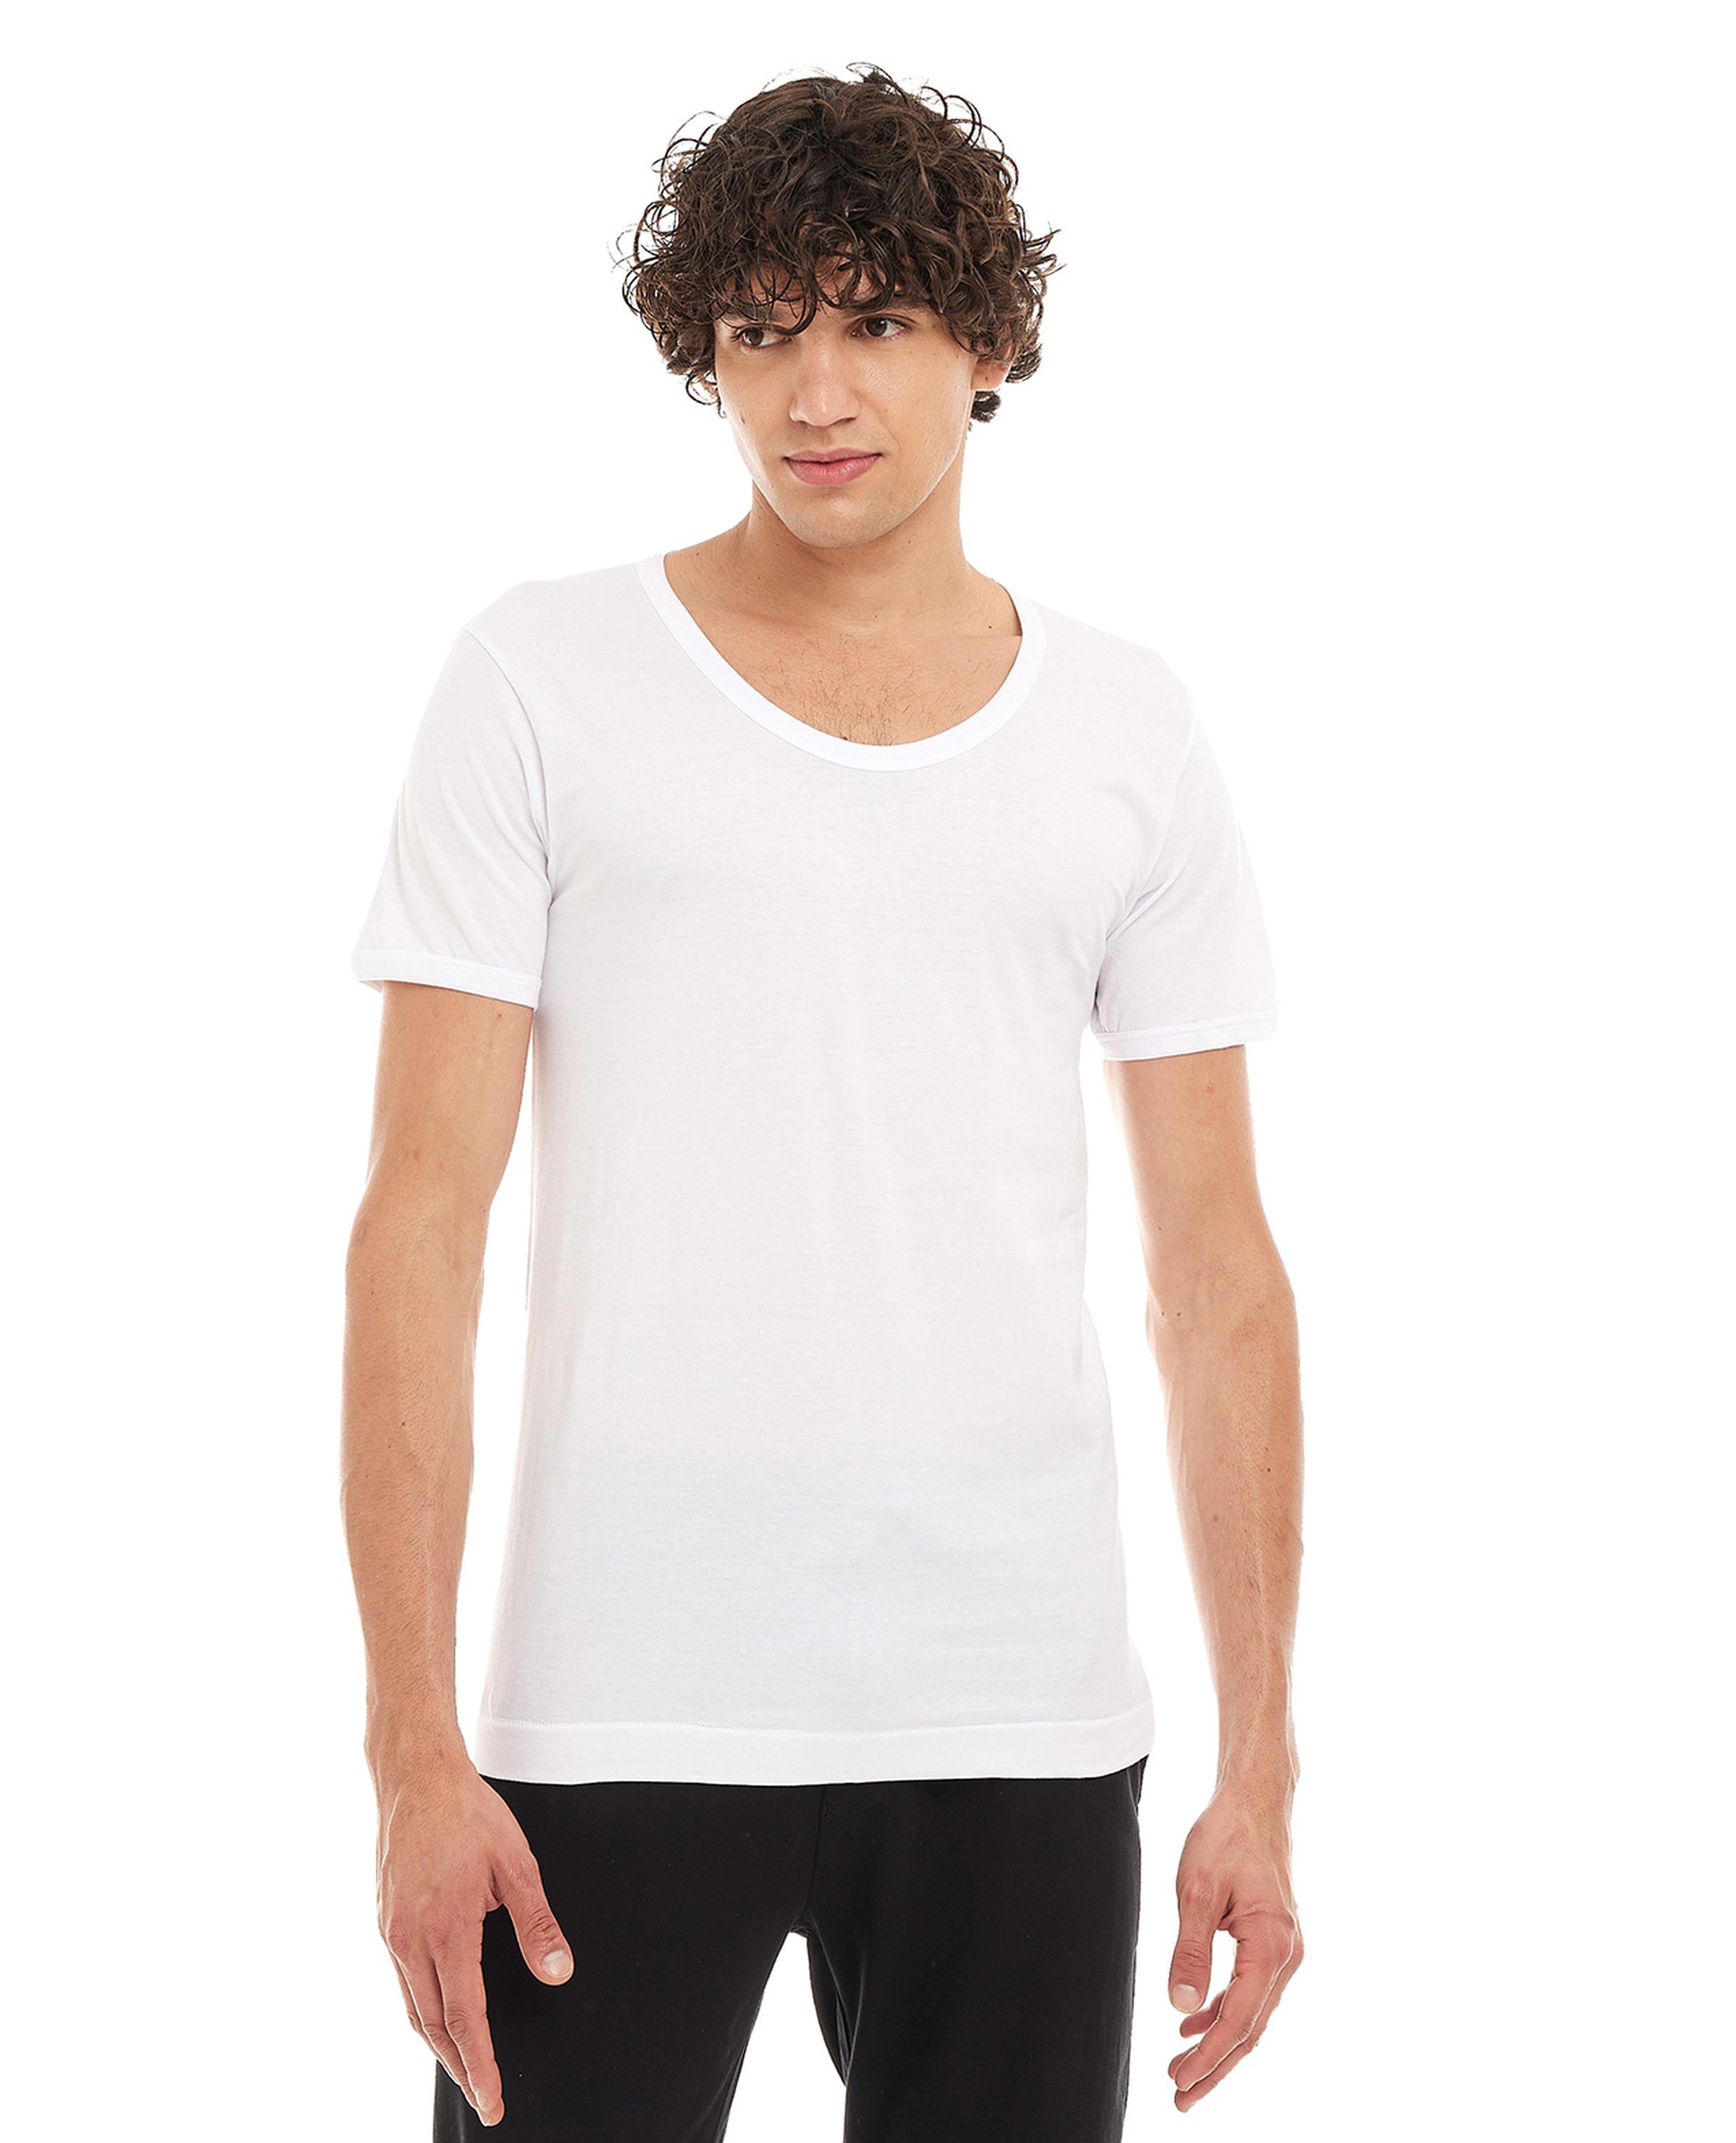 Pack of 2 Solid Crew Neck Undershirts